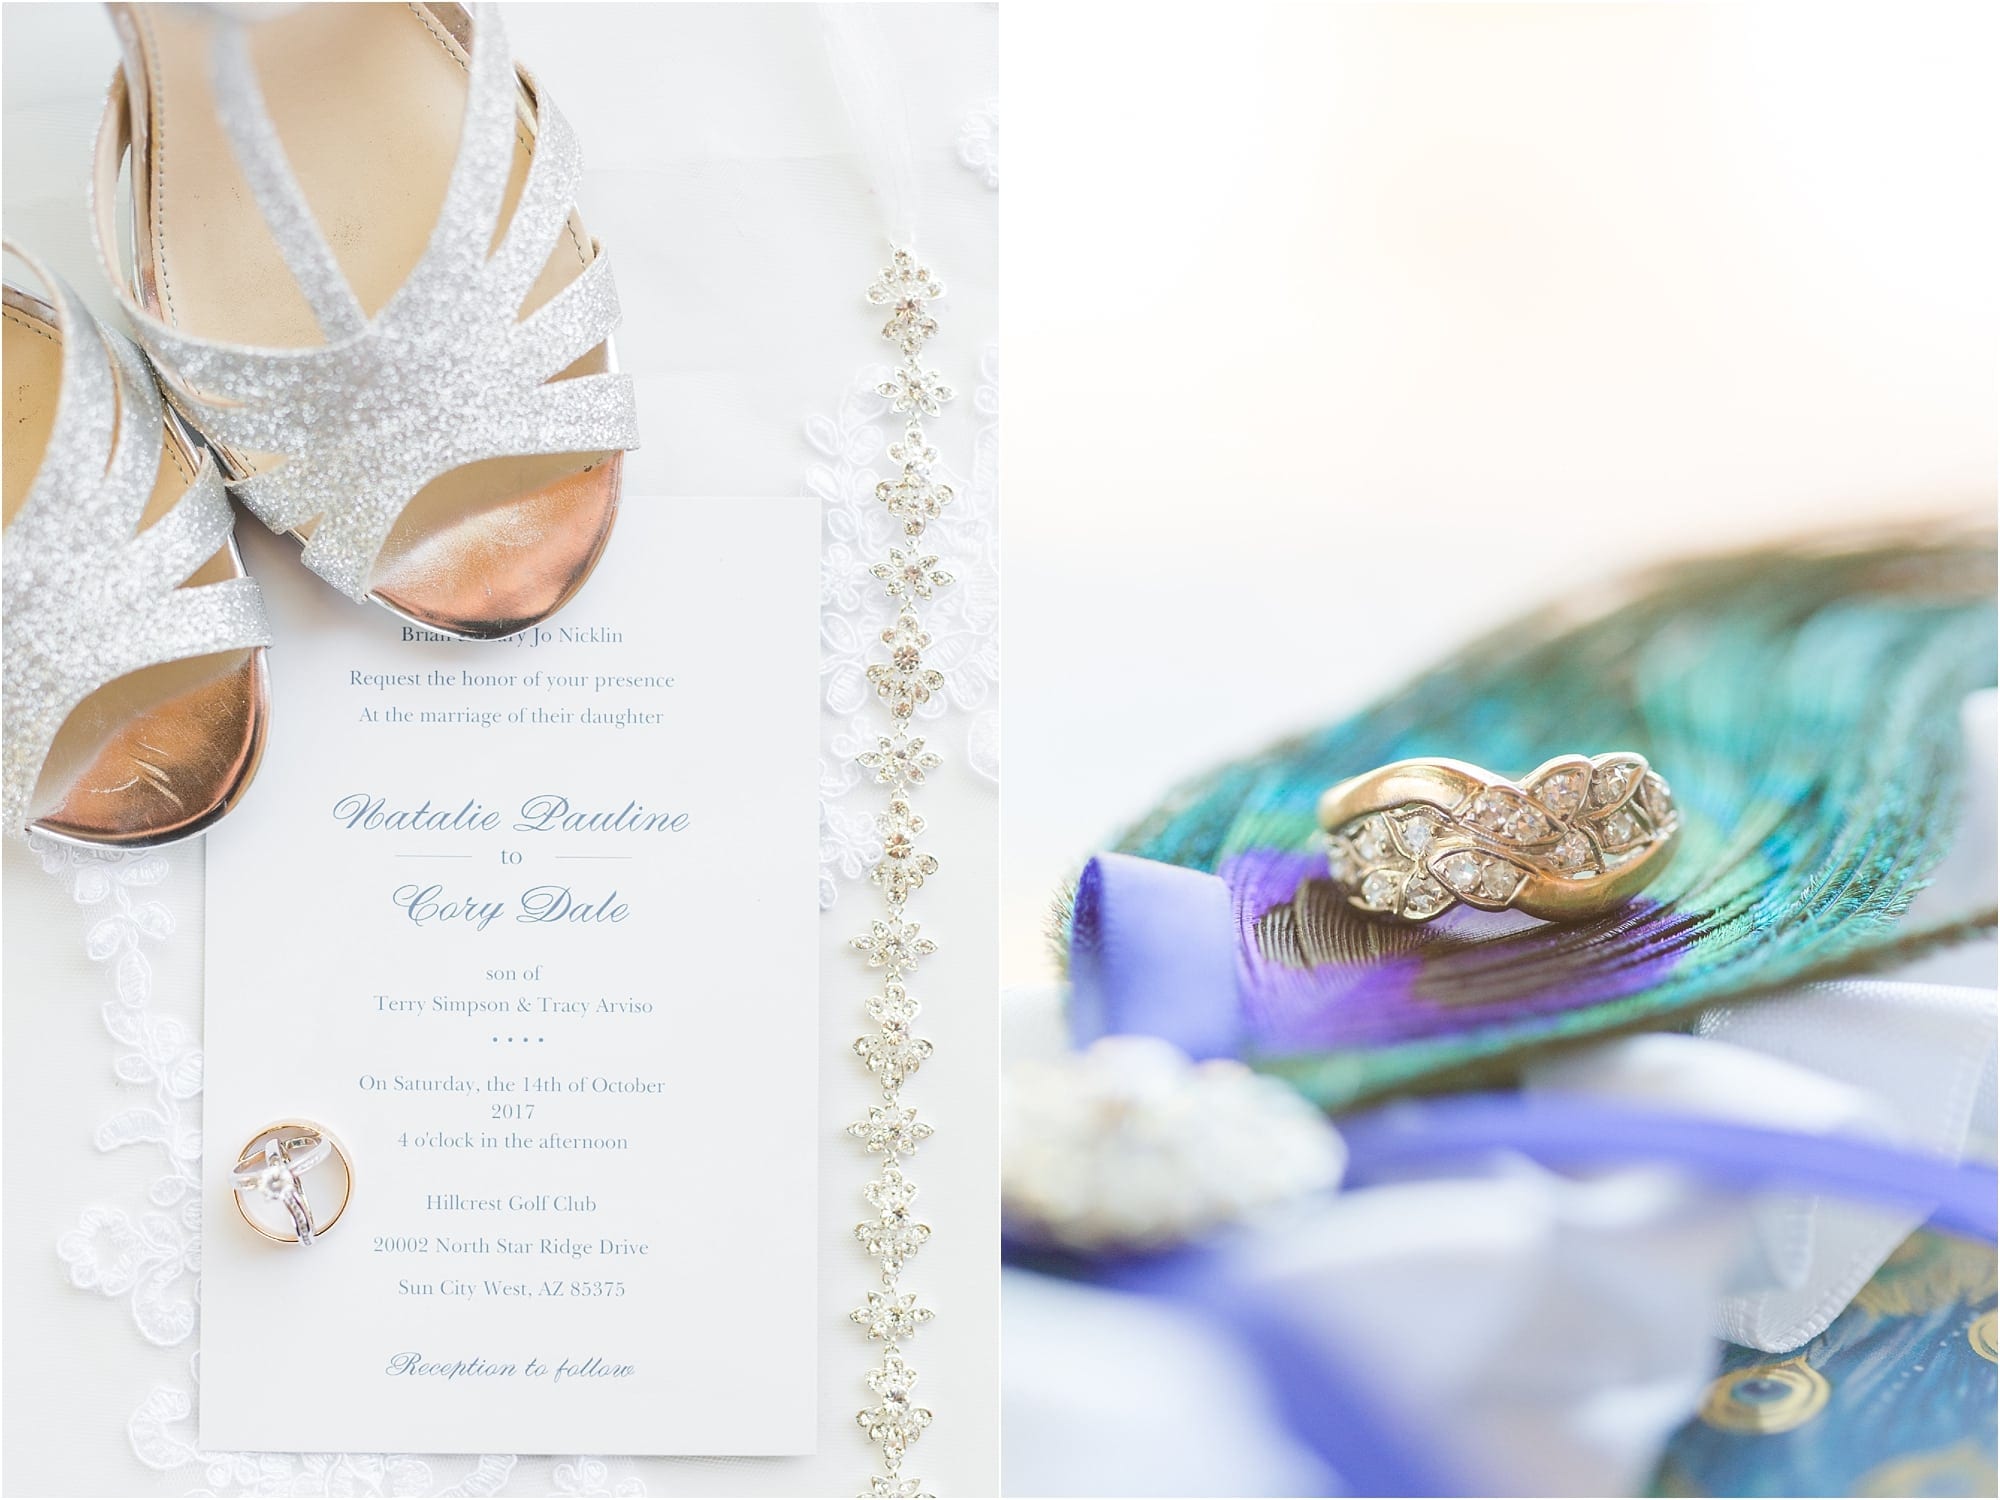 Details, Invitation, rings, peacock feathers